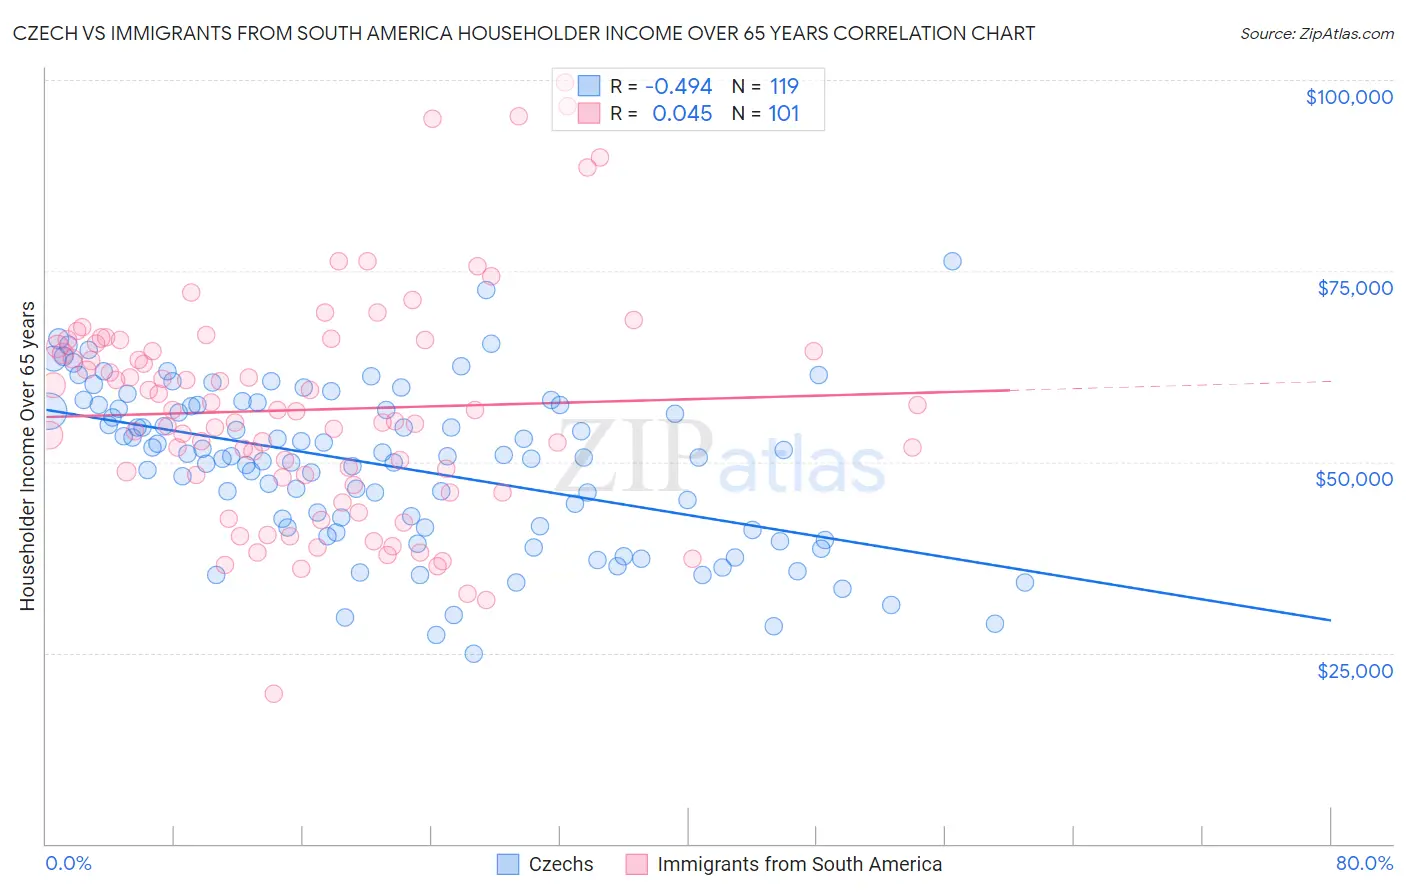 Czech vs Immigrants from South America Householder Income Over 65 years